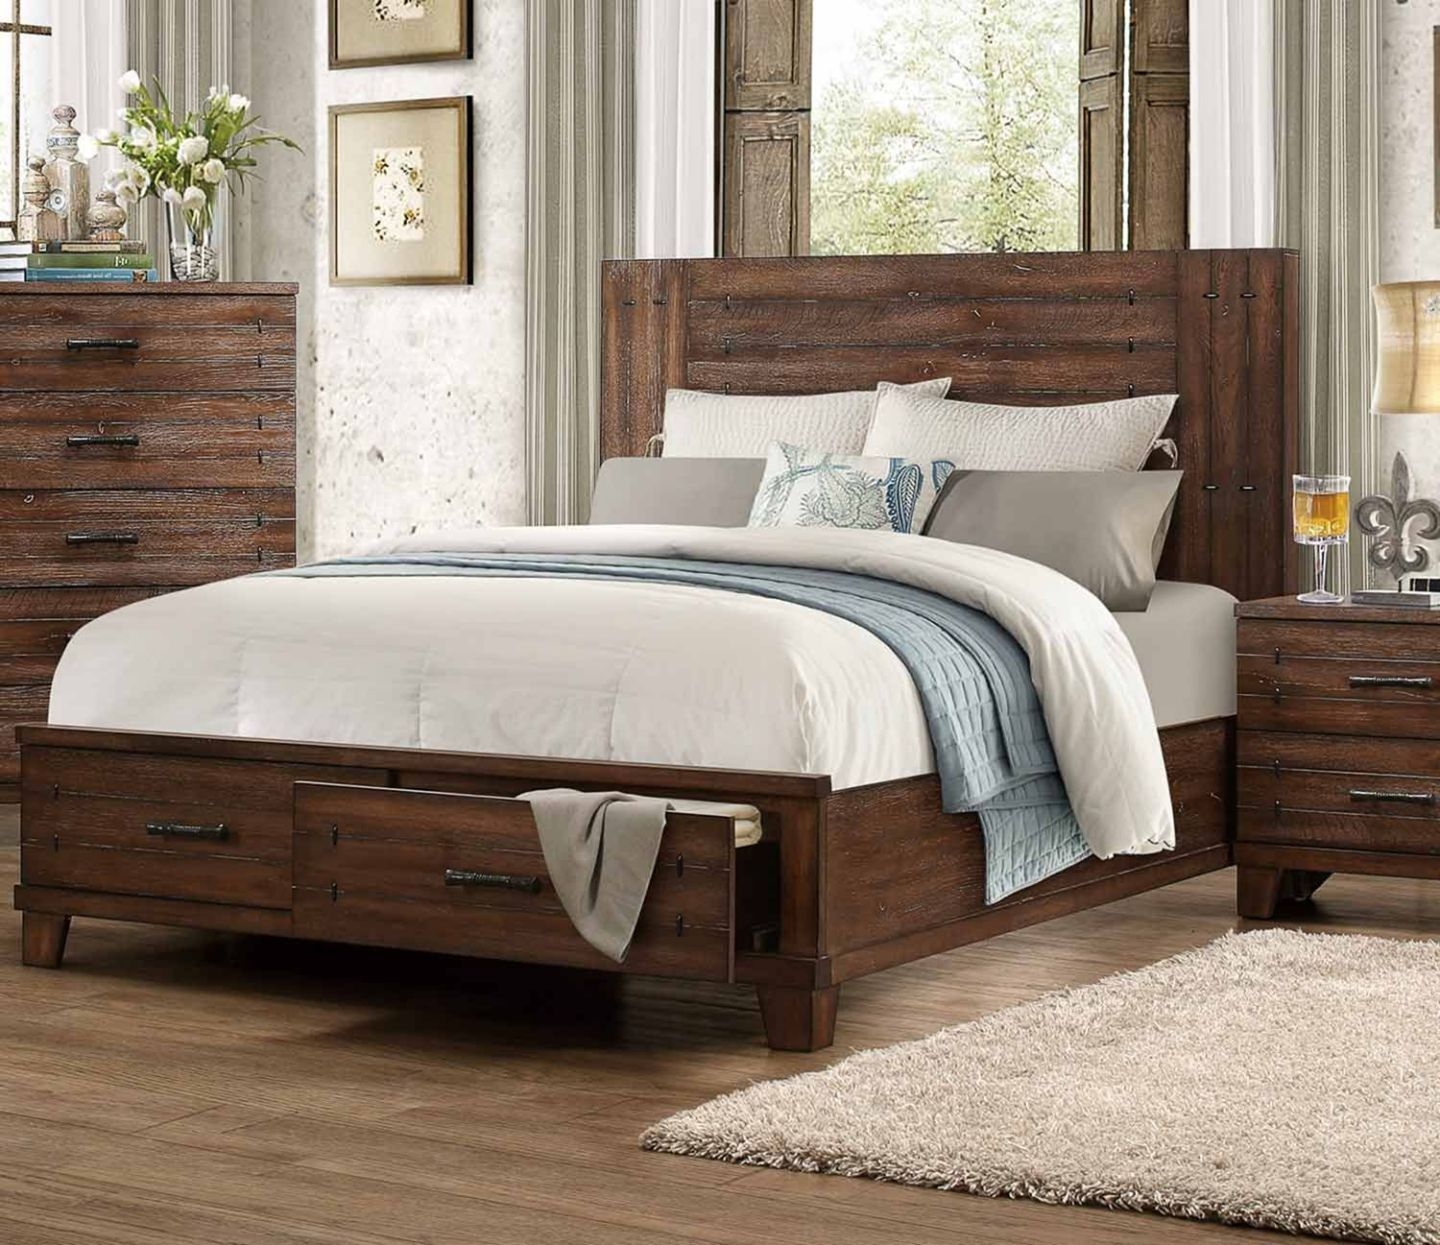 Natural Wood Bedroom Sets 6 Bedroom Design Decoration Wood with regard to sizing 1440 X 1245